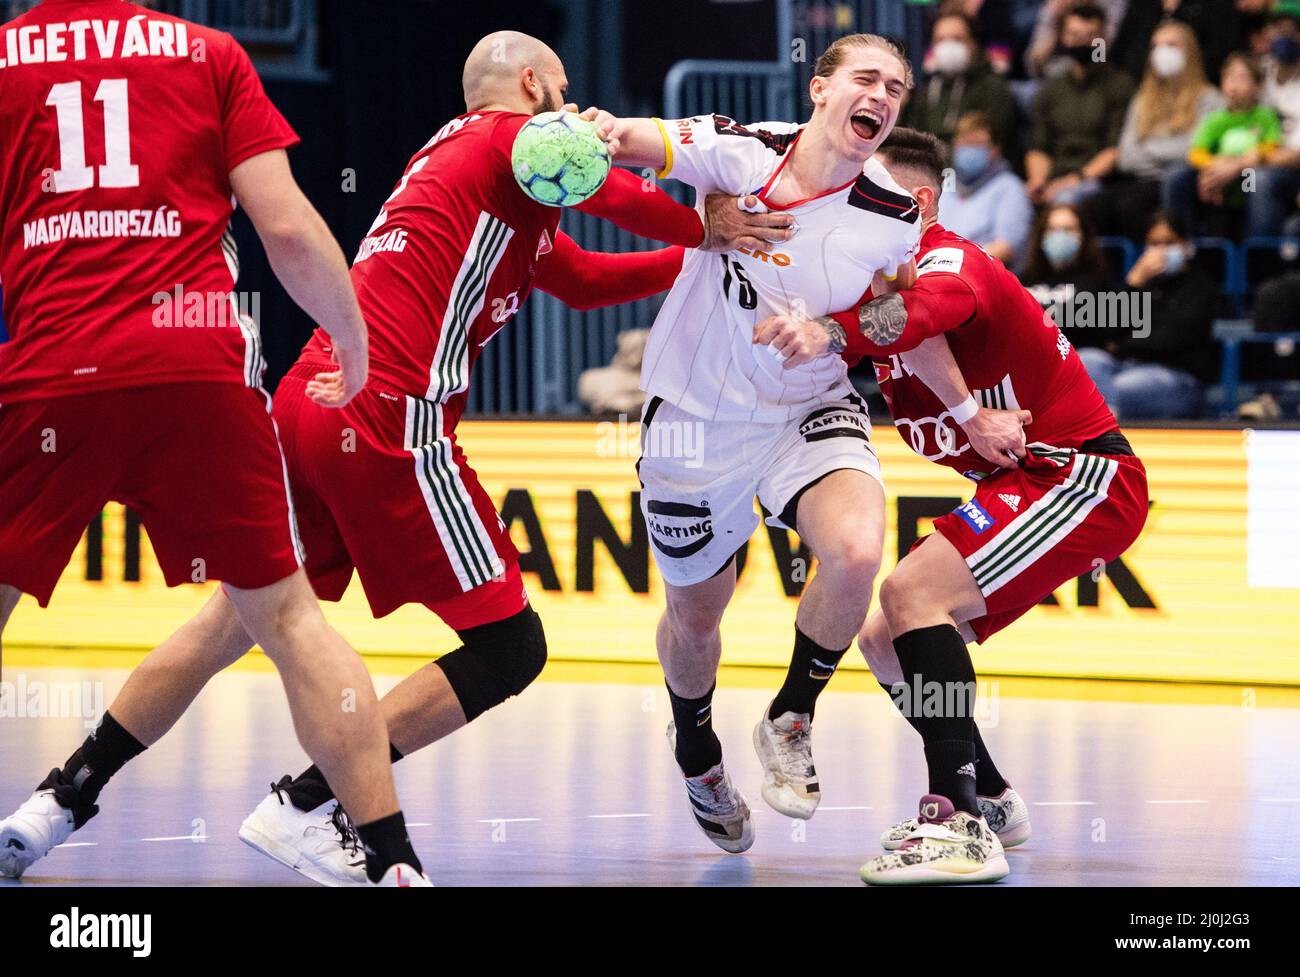 Gummersbach, Germany. 19th Mar, 2022. Handball: International match, Germany - Hungary, Schwalbe-Arena. Hungary's Adrian Sipos (2nd from left) and Csaba Leimeter (right) try to prevent Germany's Juri Knorr from throwing. Credit: Marius Becker/dpa/Alamy Live News Stock Photo